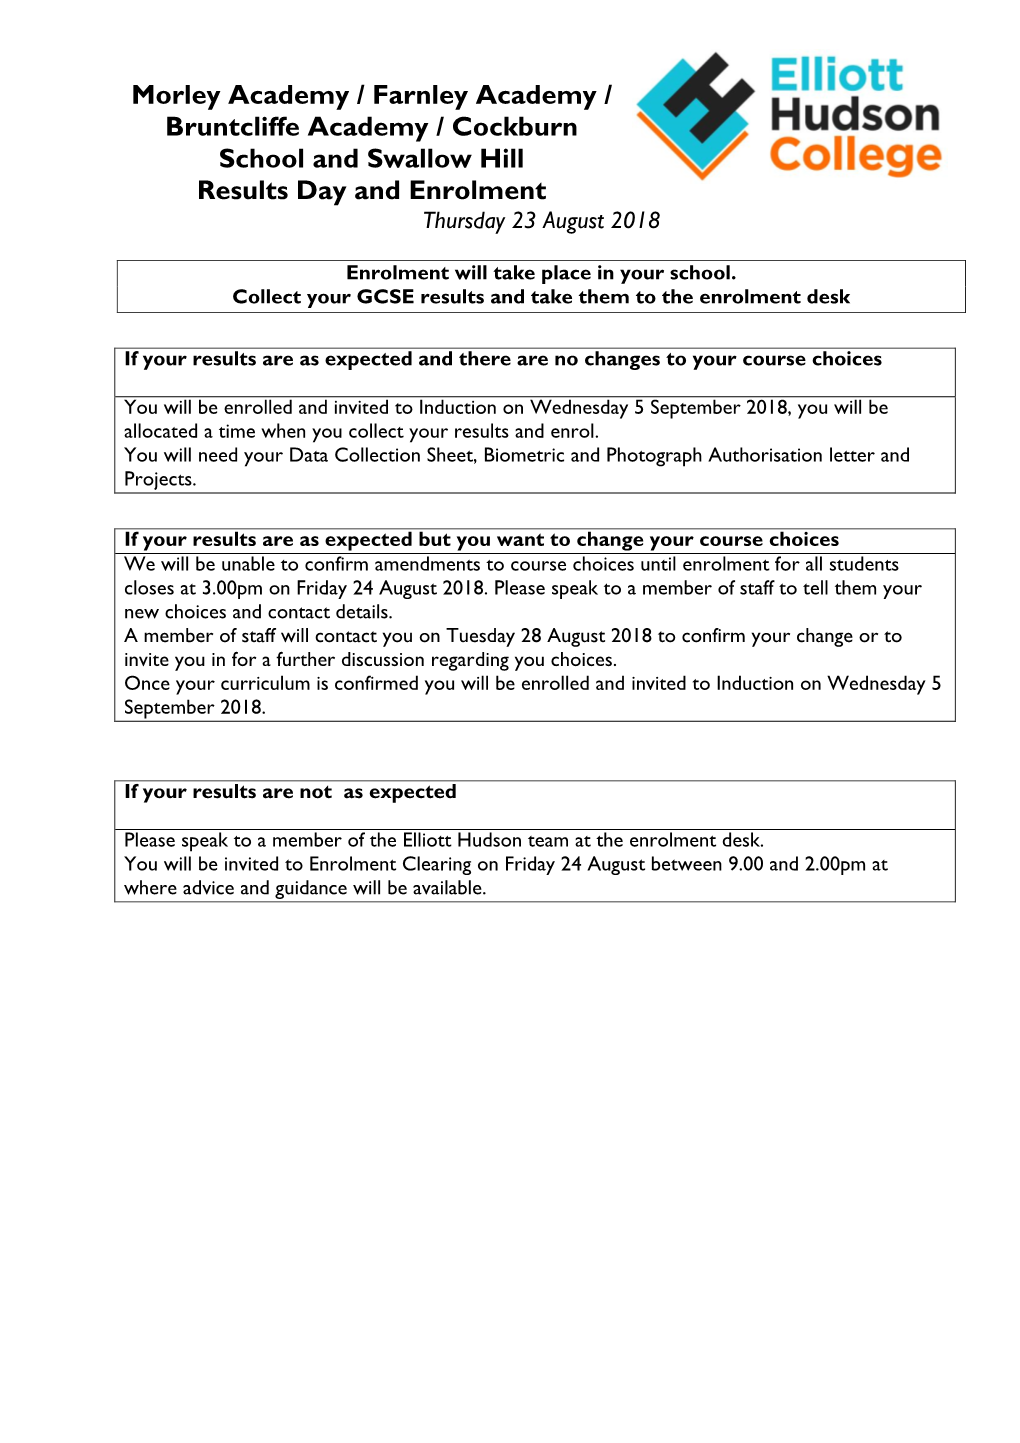 Morley Academy / Farnley Academy / Bruntcliffe Academy / Cockburn School and Swallow Hill Results Day and Enrolment Thursday 23 August 2018